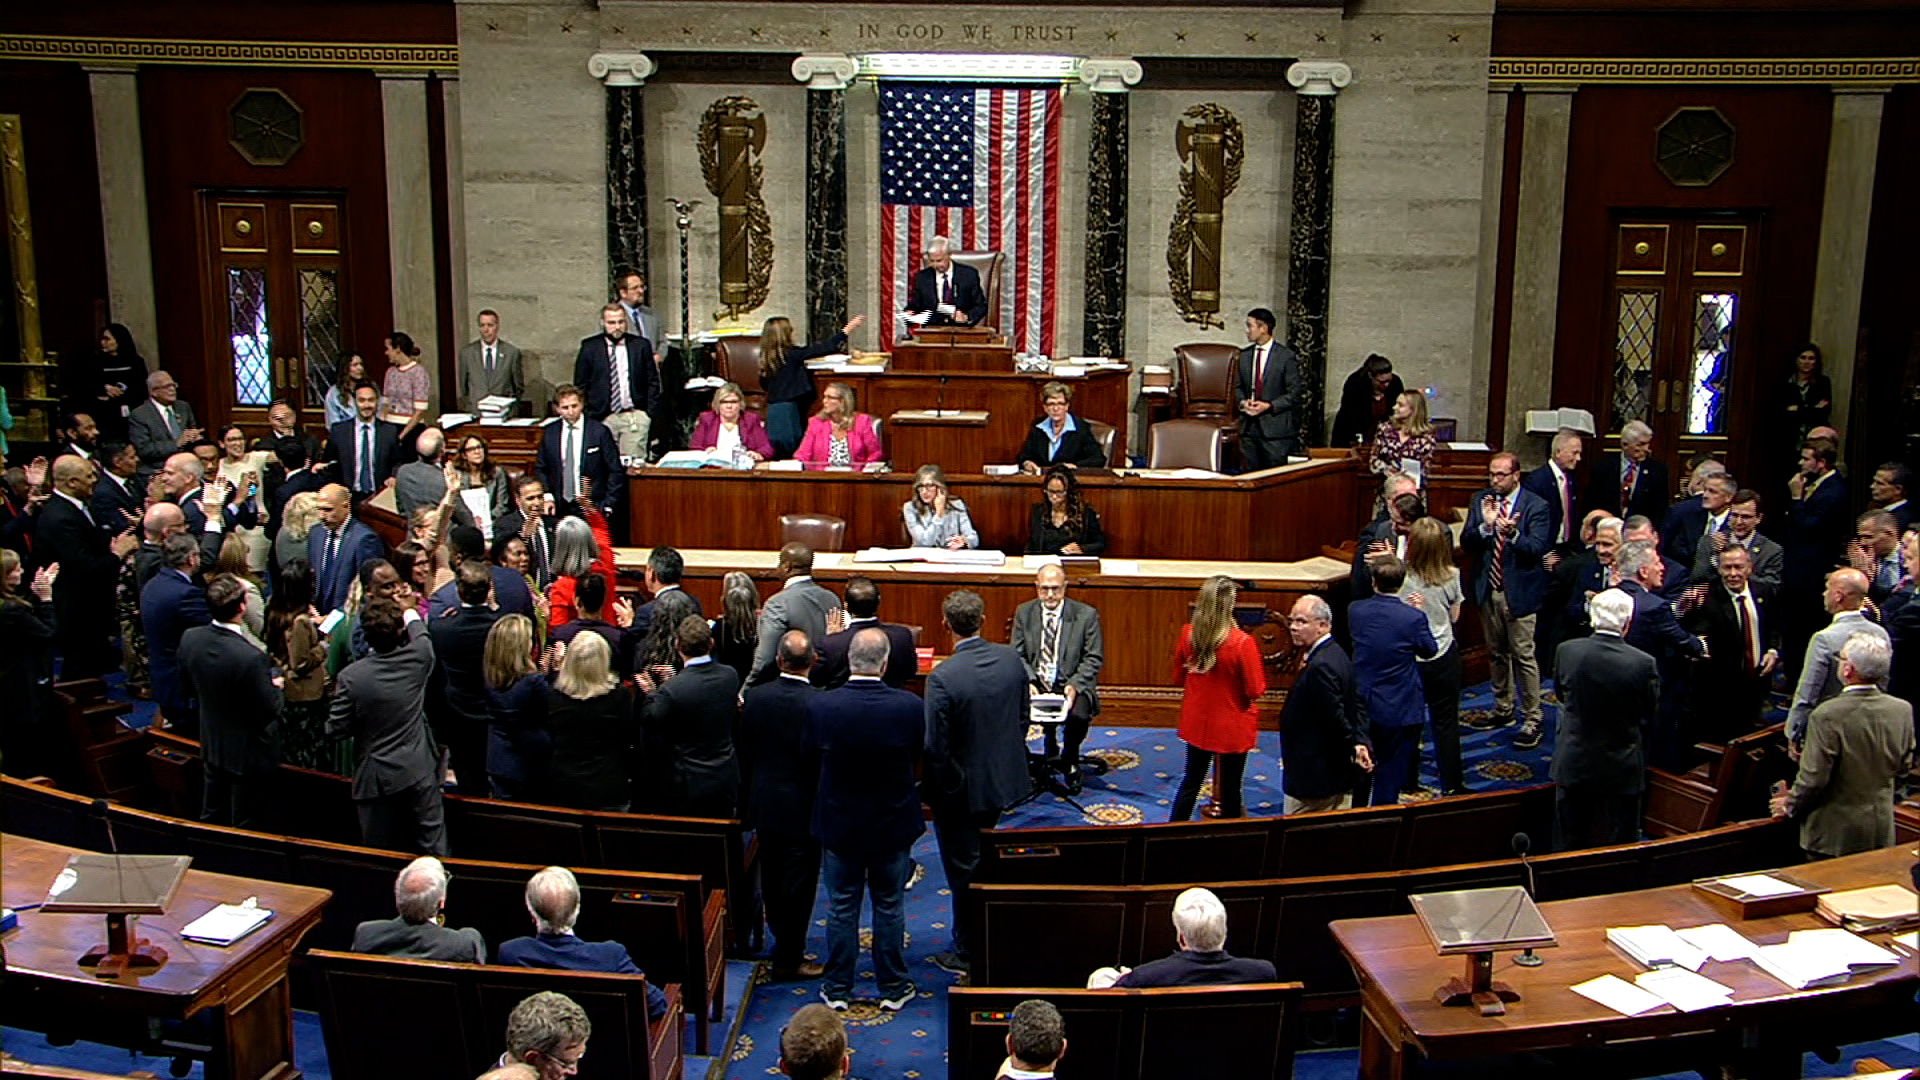 The House floor shortly after they passed a 45-day short term spending resolution, which includes natural disaster aid but not additional funding for Ukraine or border security. The final vote tally was 335-91.